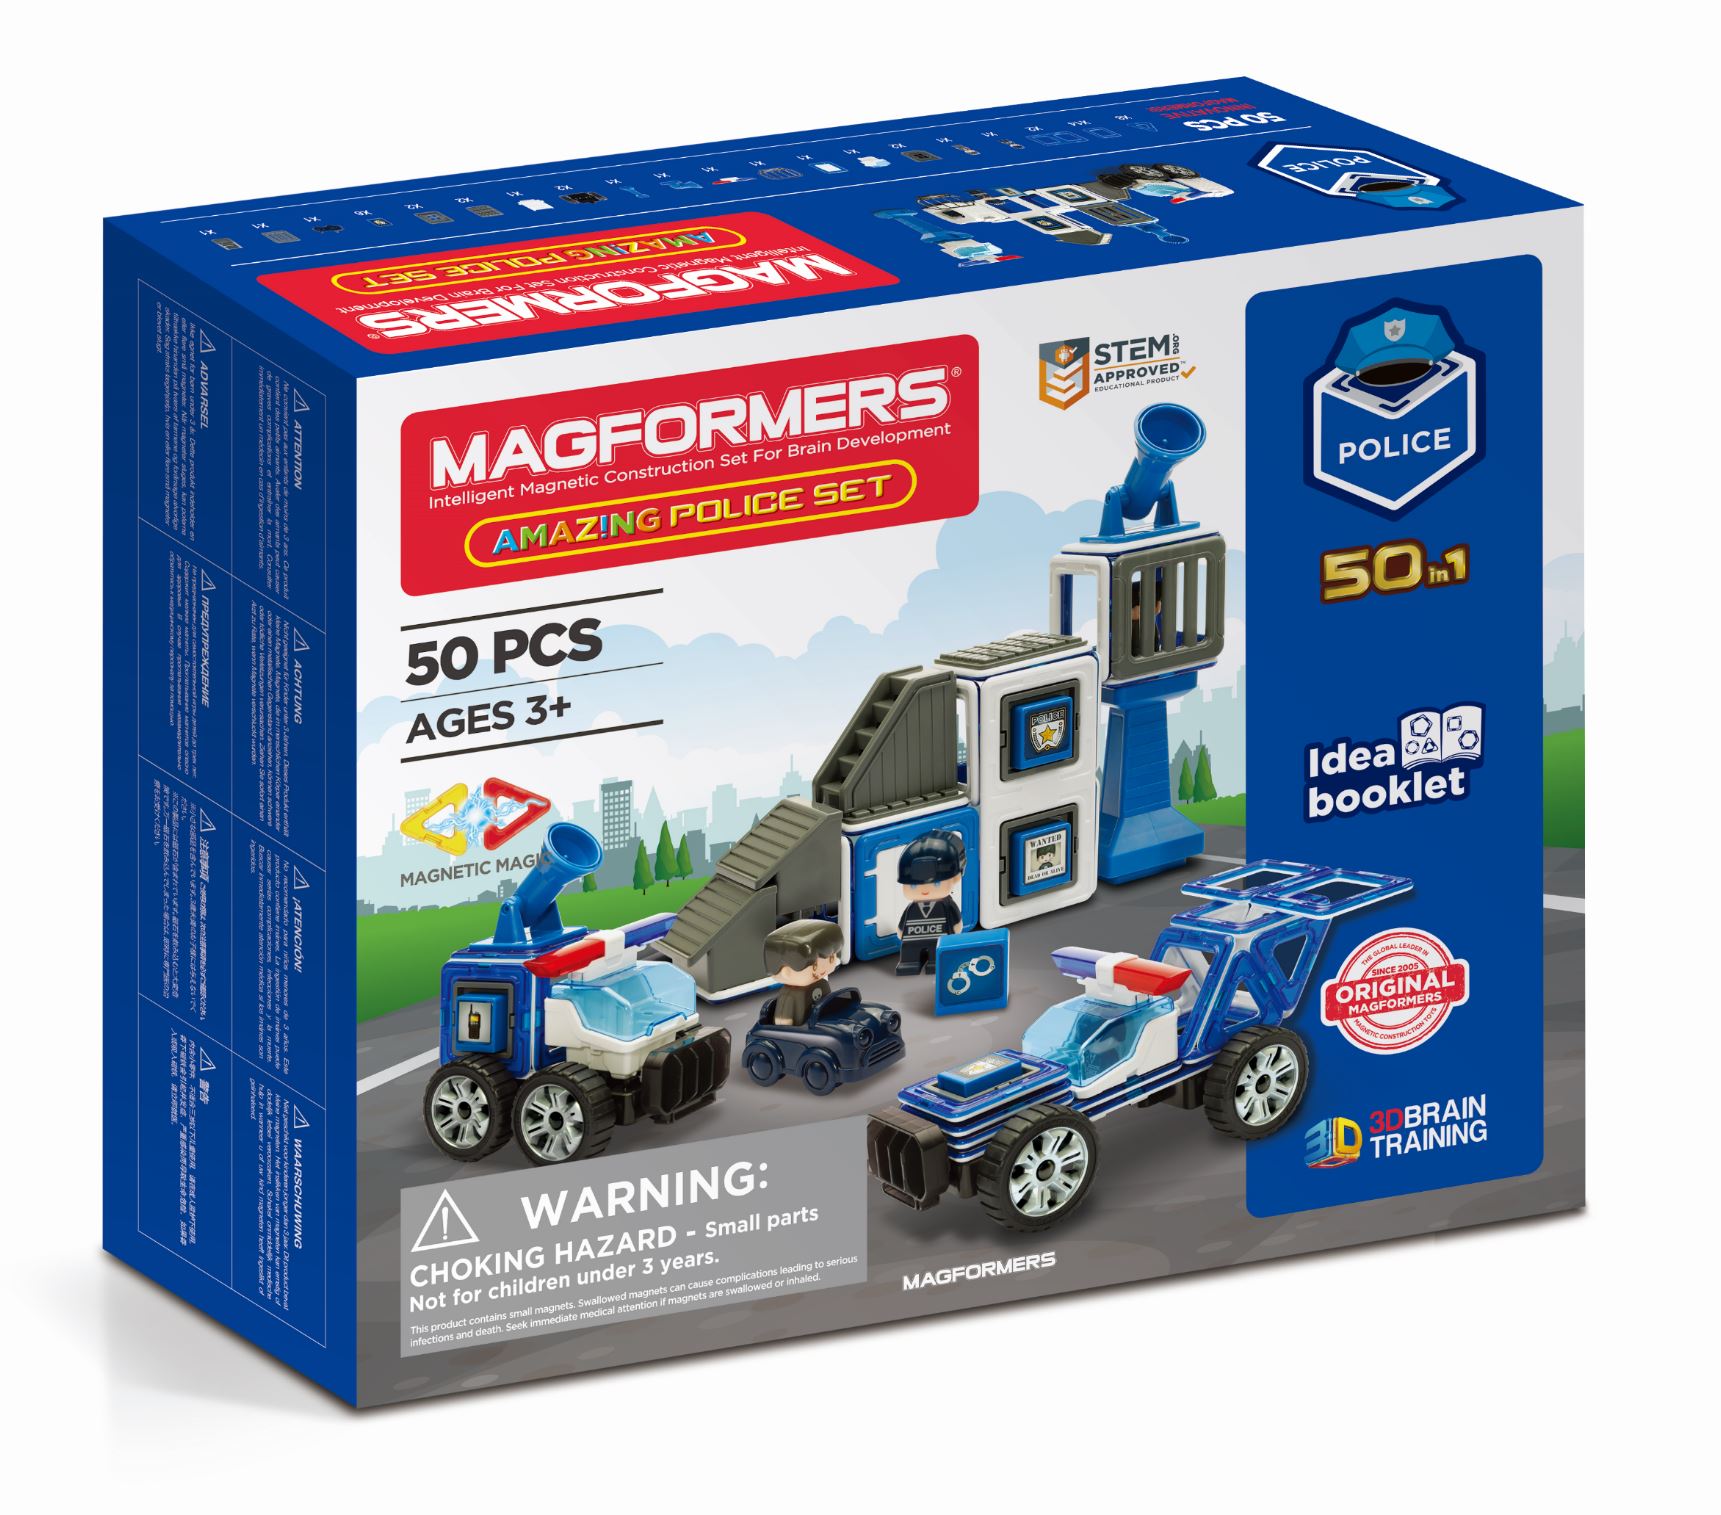 Magformers Amazing Police 50 Pieces, Wheels, Blue red colors, Magnetic Geometric tiles STEM Toy Ages 3+ - image 1 of 5